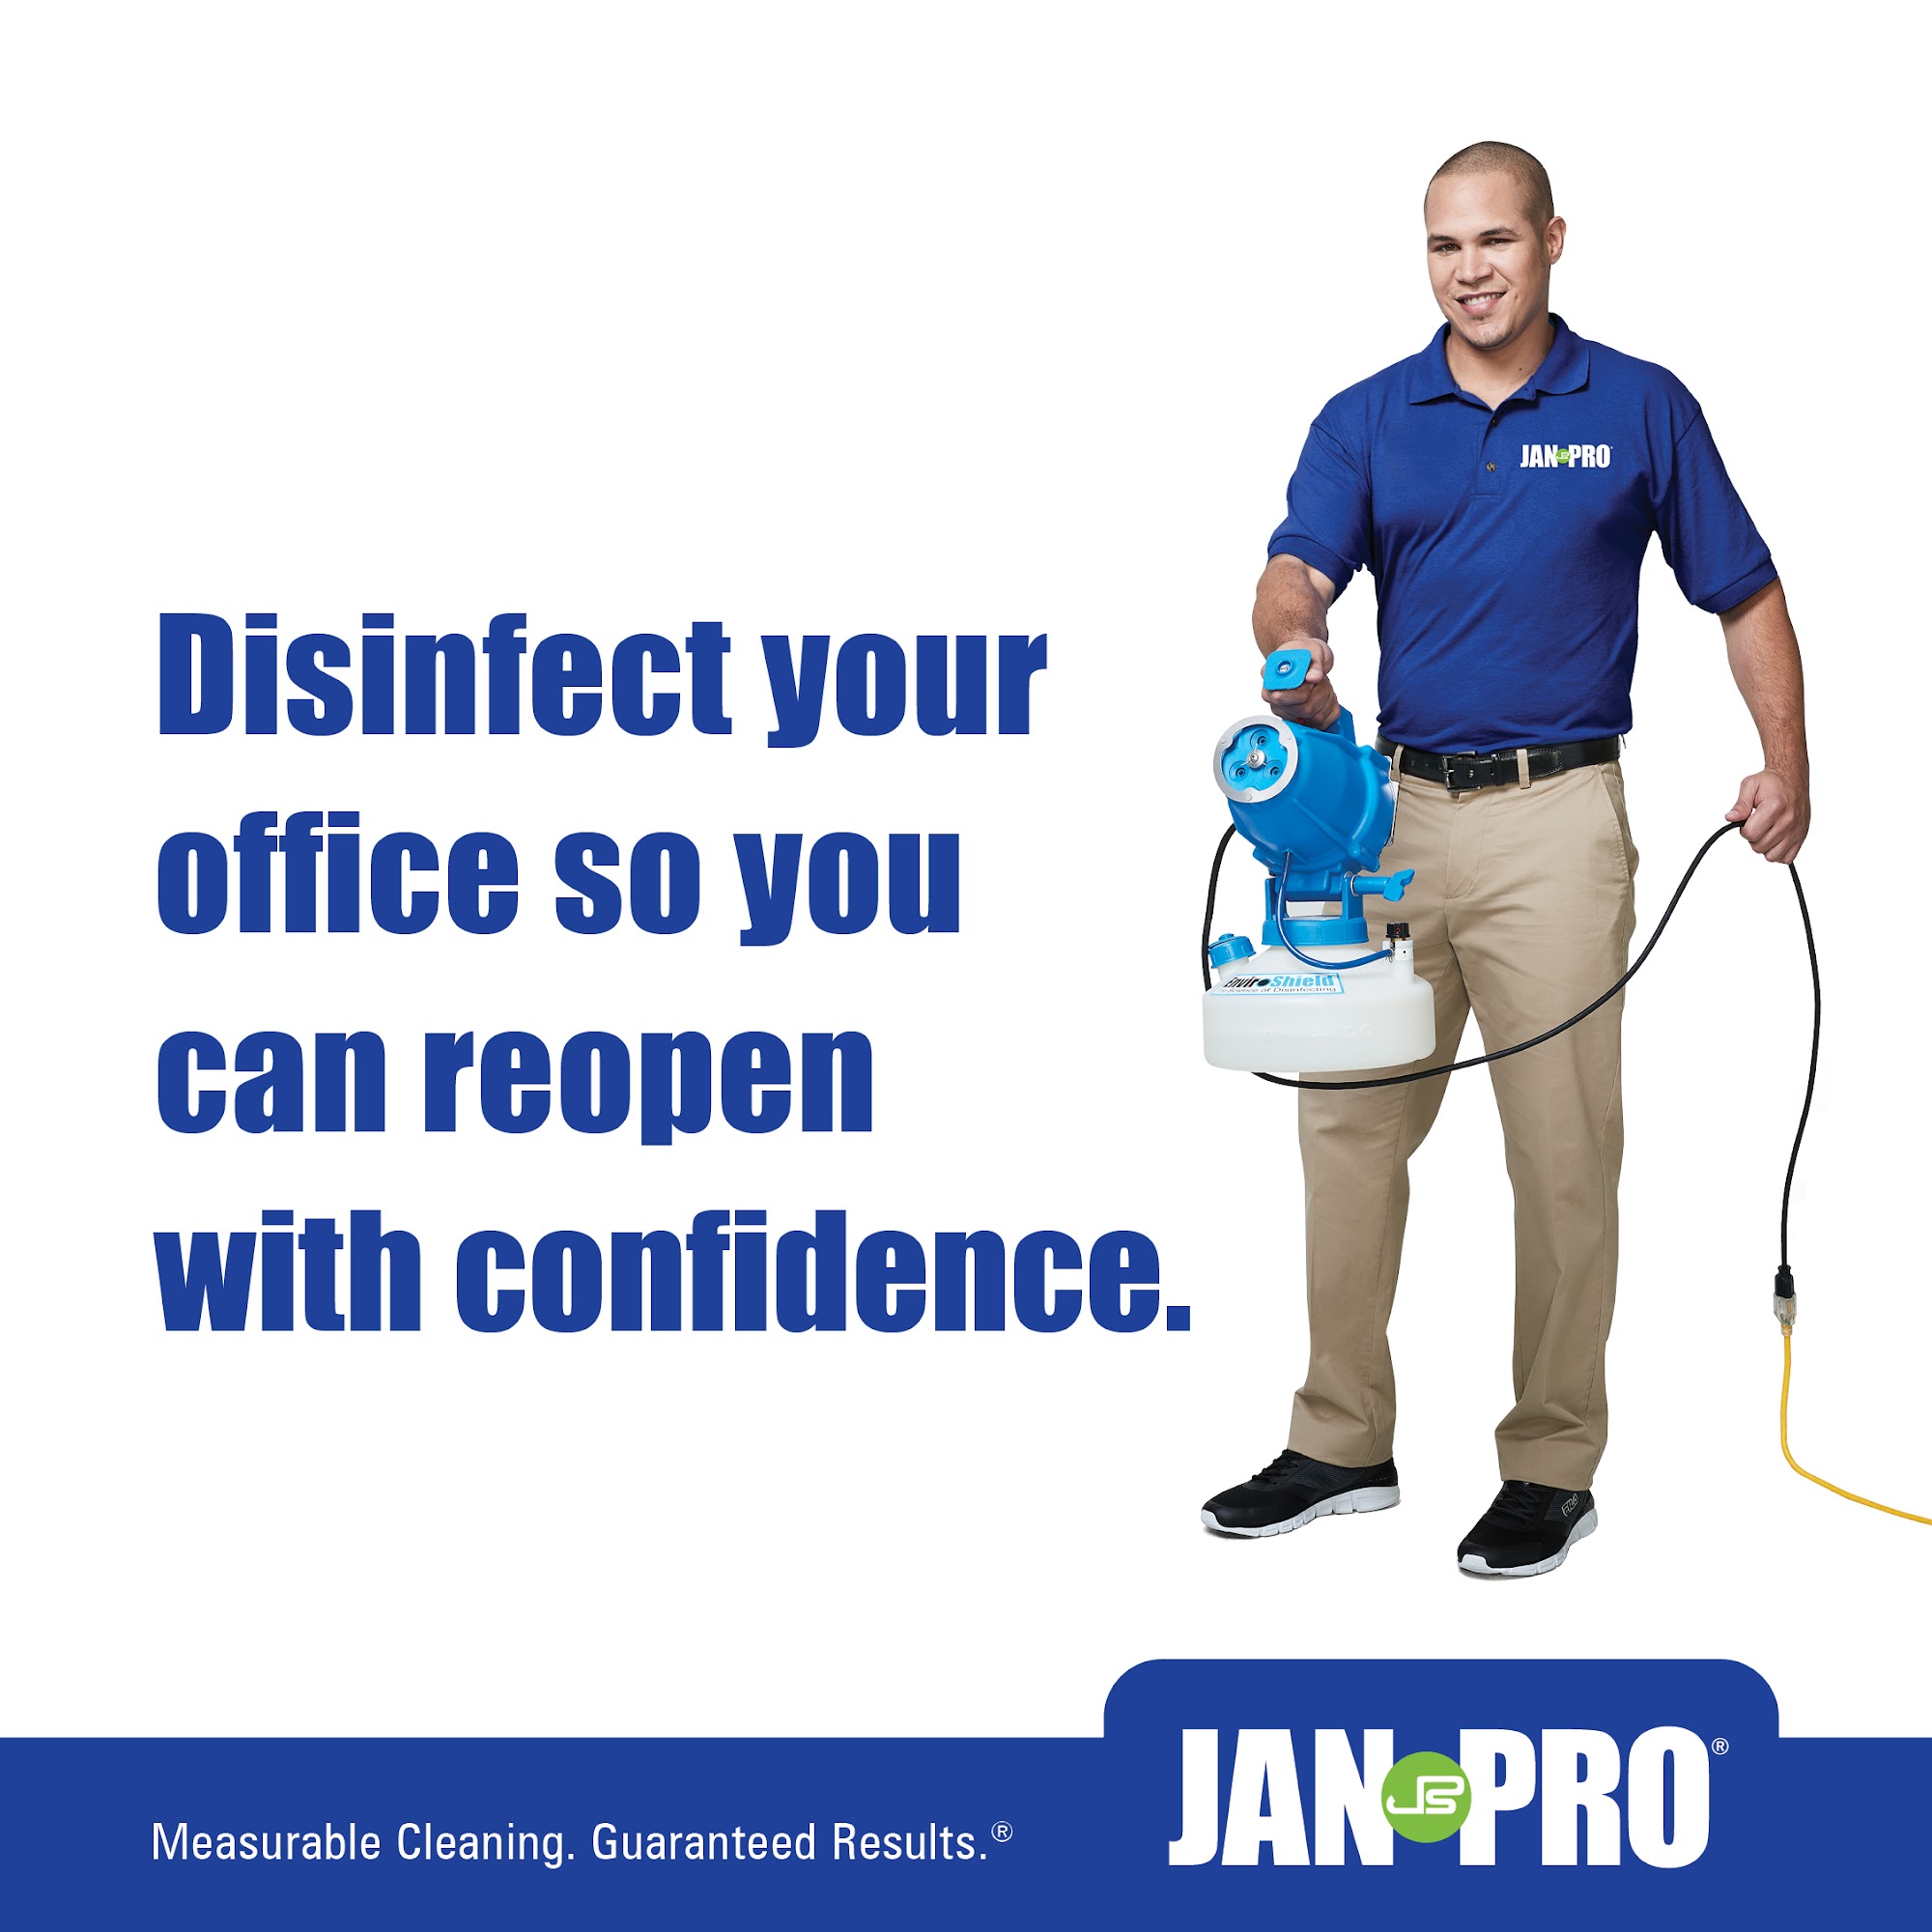 JAN-PRO Cleaning & Disinfecting in Delaware Valley 410 White Horse Pike, Haddon Heights New Jersey 08035